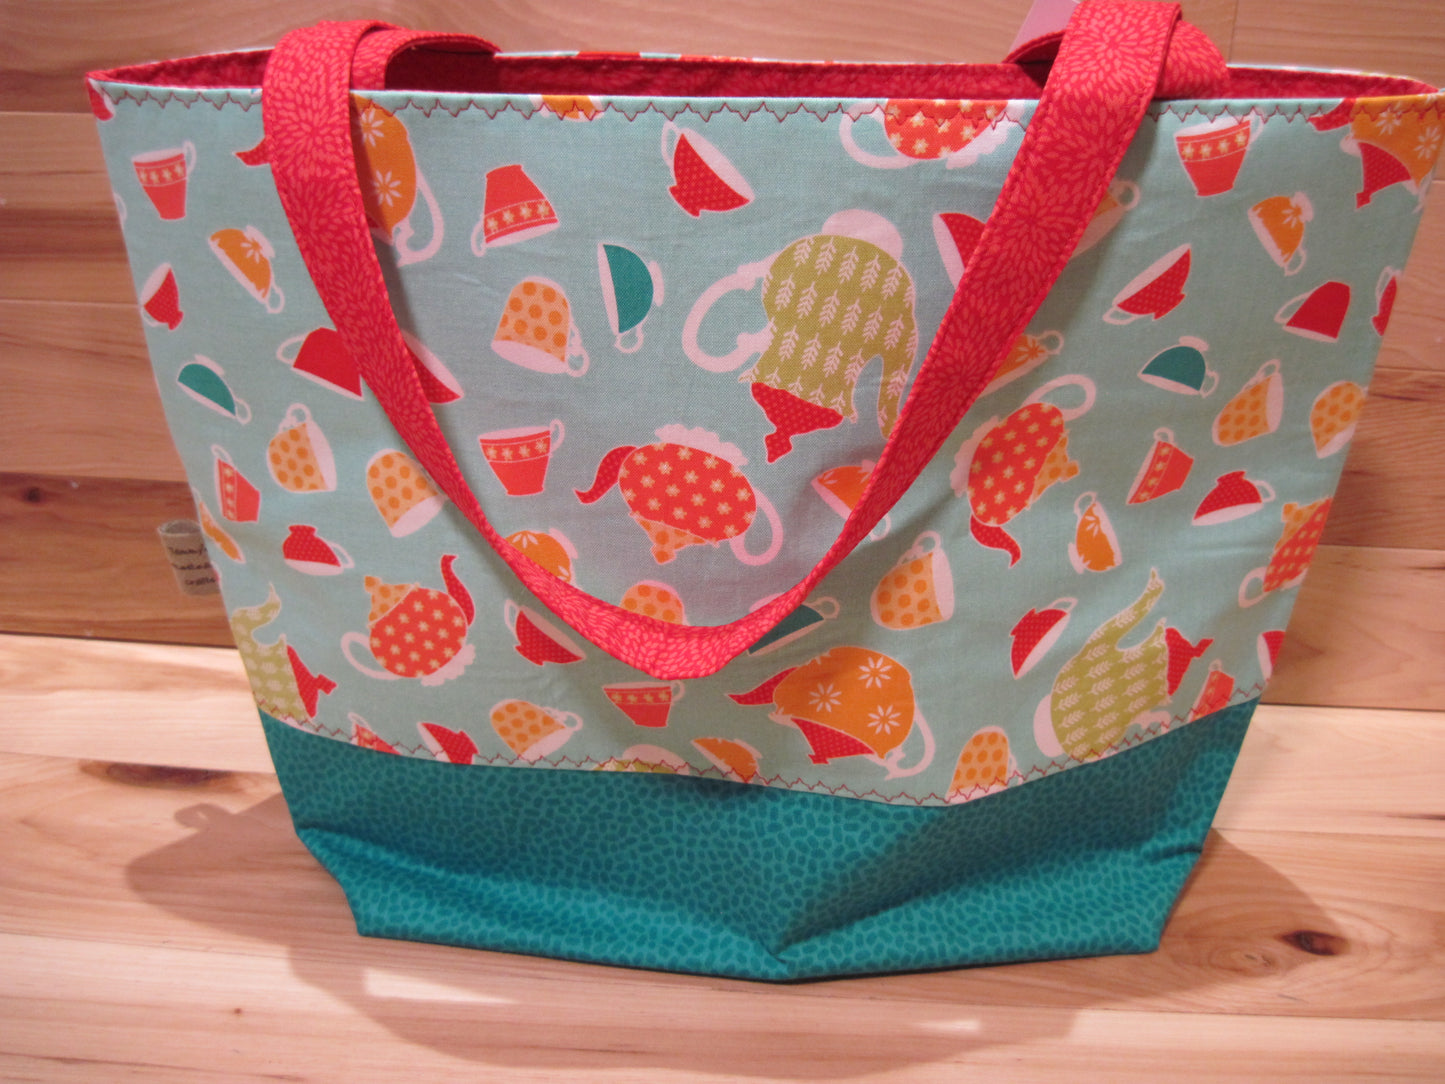 X-Large Tote Style Bag ~ Tea pots & tea cups w/ teal green & red sewn handles